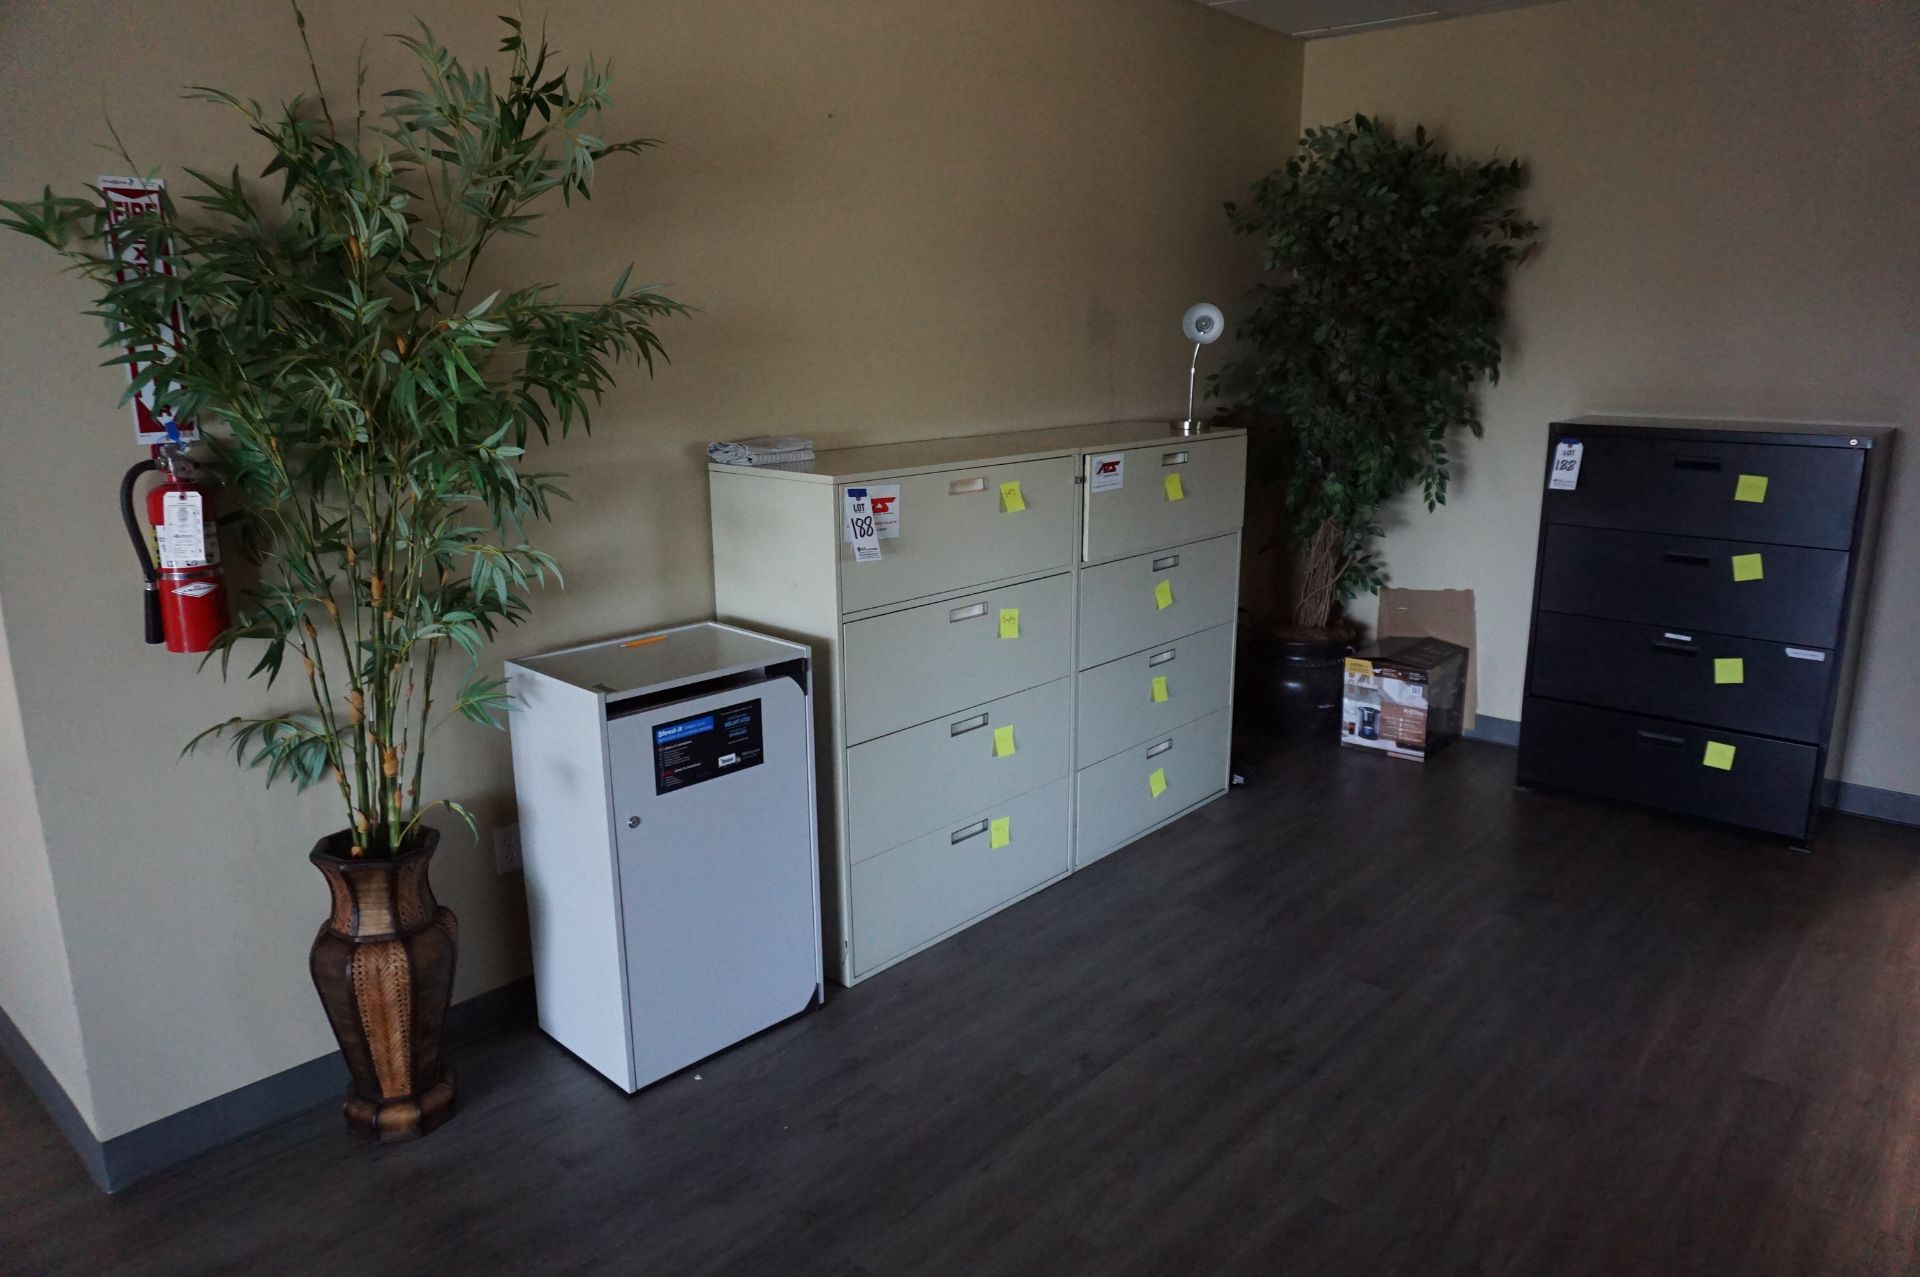 SECOND FLOOR FOYER CONTENTS TO INCLUDE: FILE CABINETS, DECORATIVE PLANTERS AND PLANTS, PAINTING,